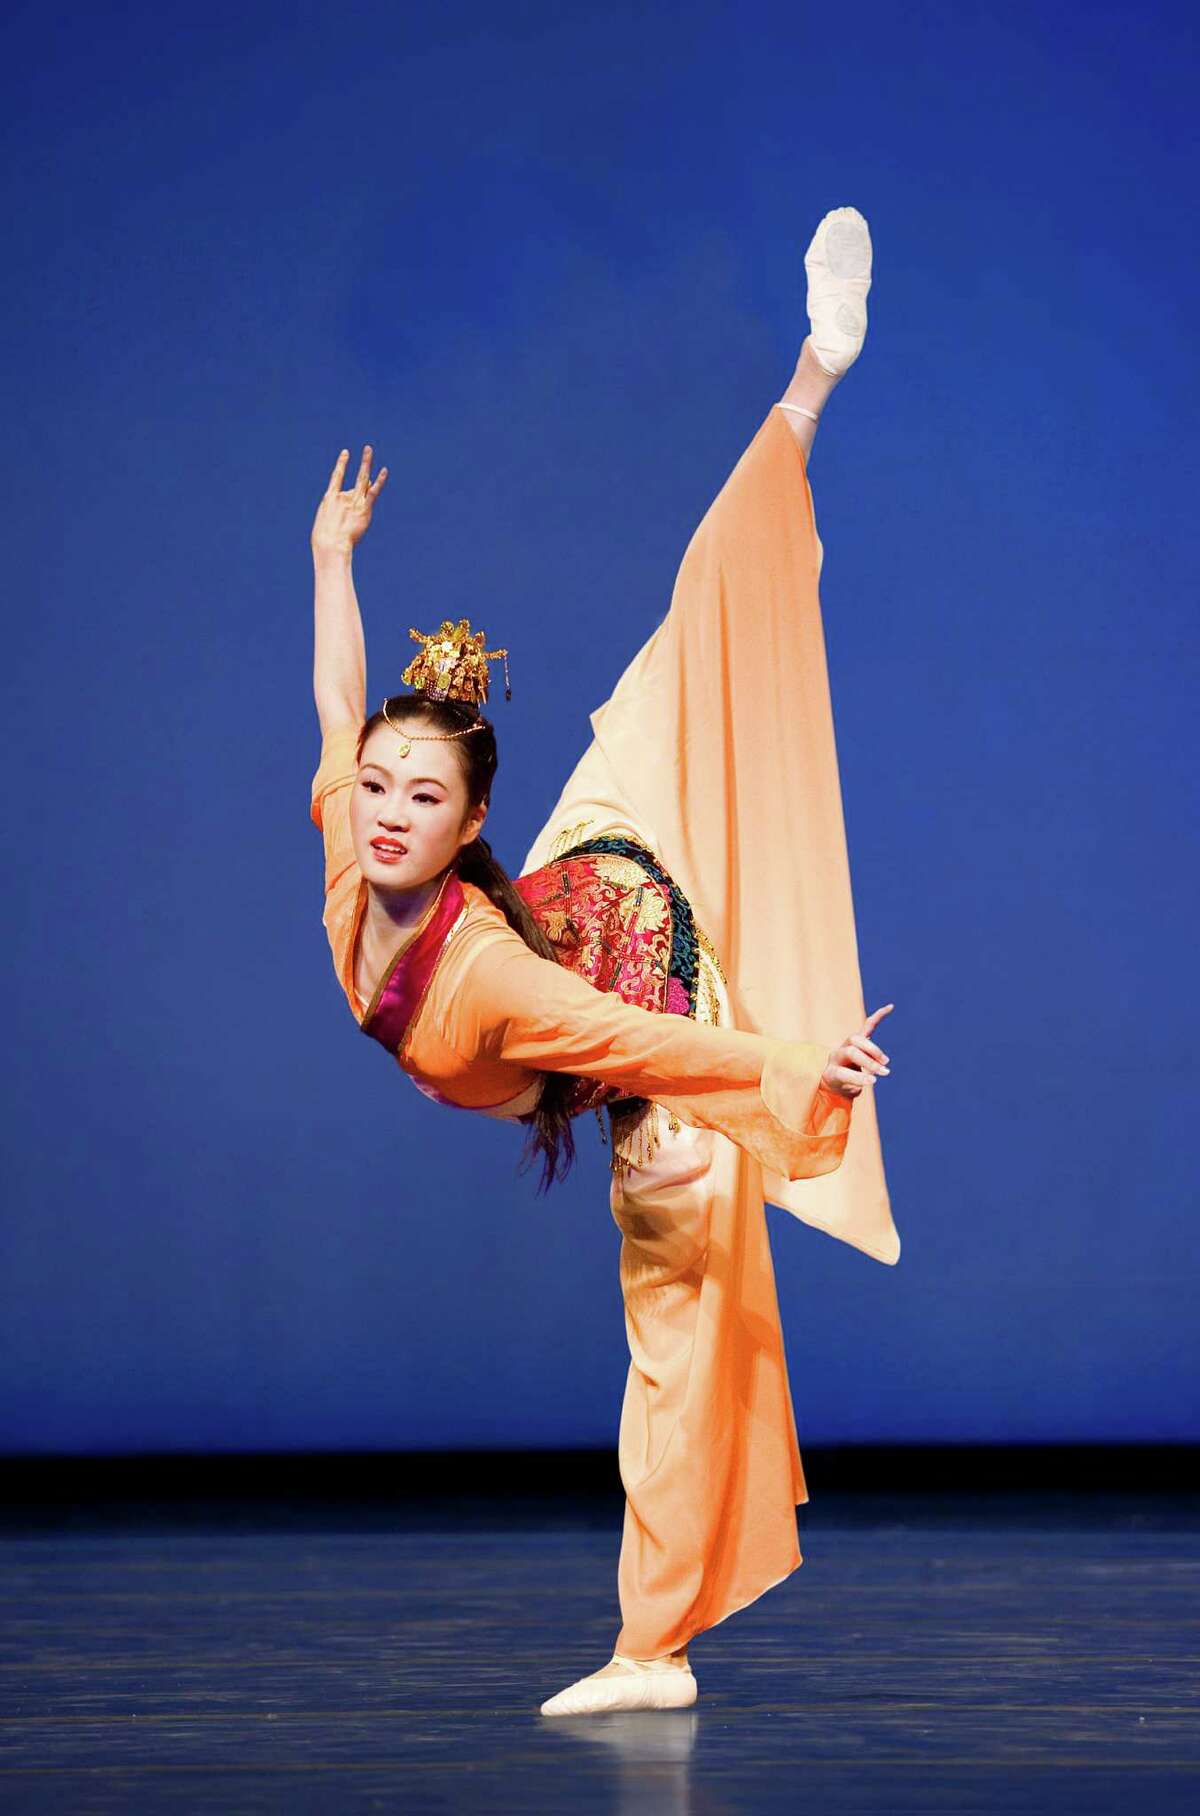 Lily Wang, a dancer with Shen Yun Performing Arts, will appear at the Palace Theater in Waterbury this week. The classical Chinese dance group will also be performing at Lincoln Center in New York, Jan. 11-15.